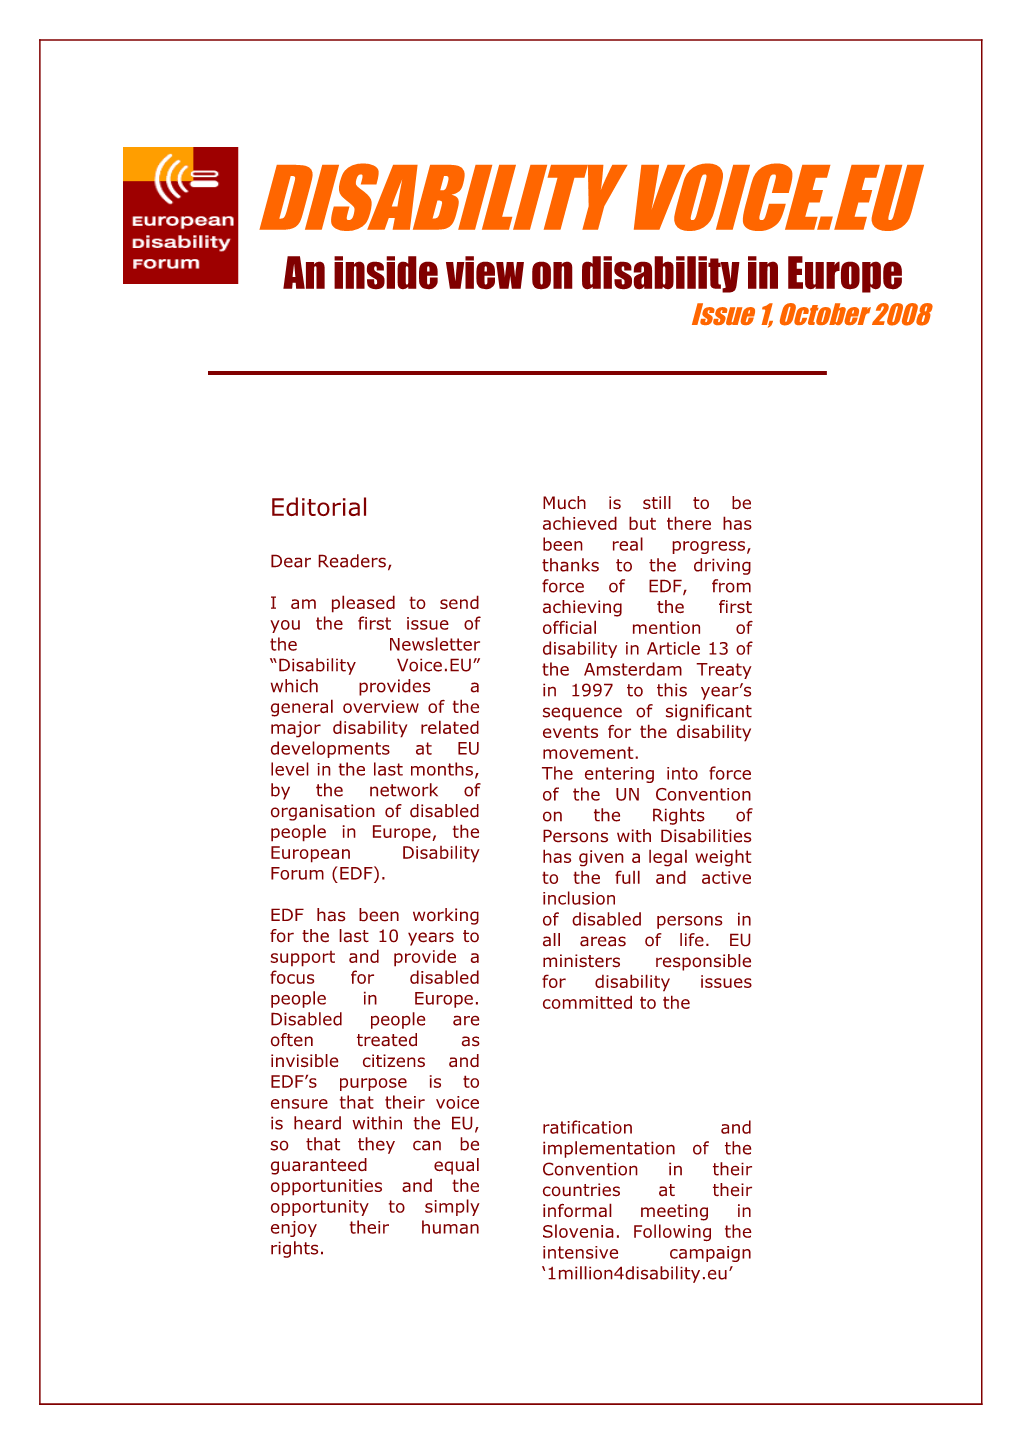 Disability Voice.EU, Issue 1, October 2008